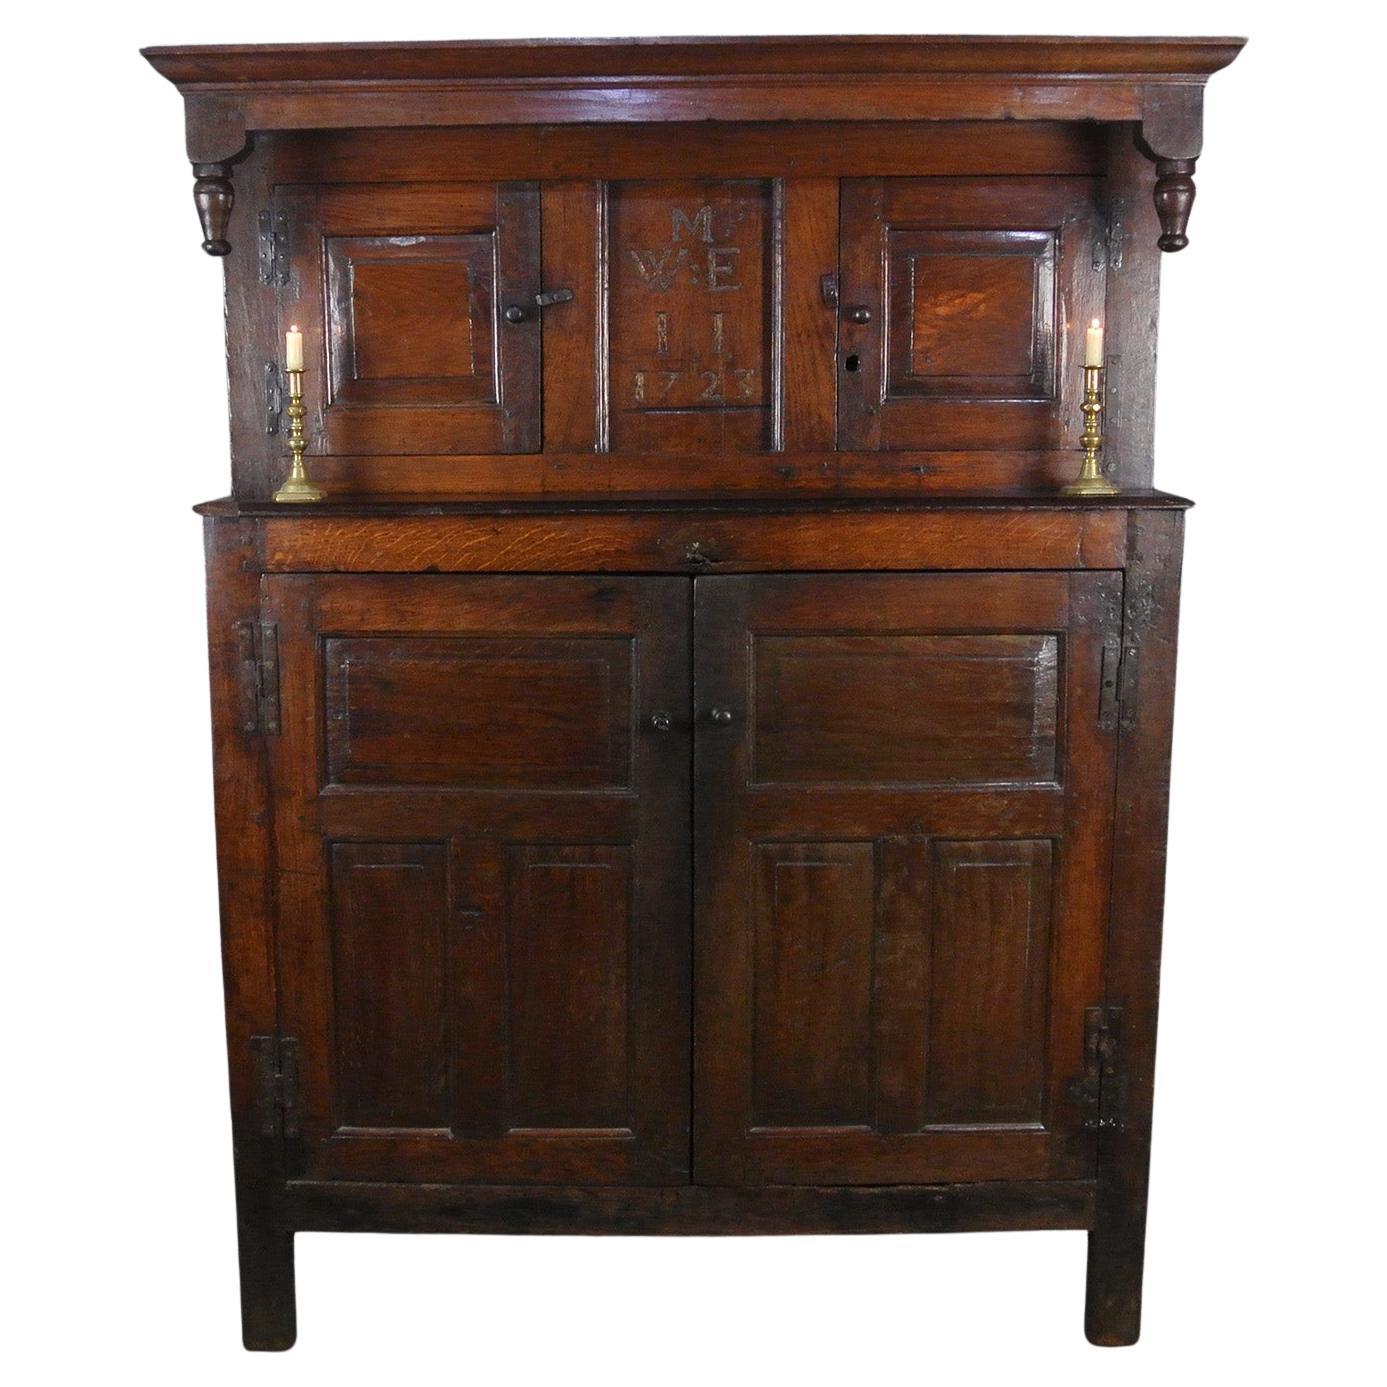 Exceptional Dated English Oak Press Cupboard with Secrets - 1723 For Sale